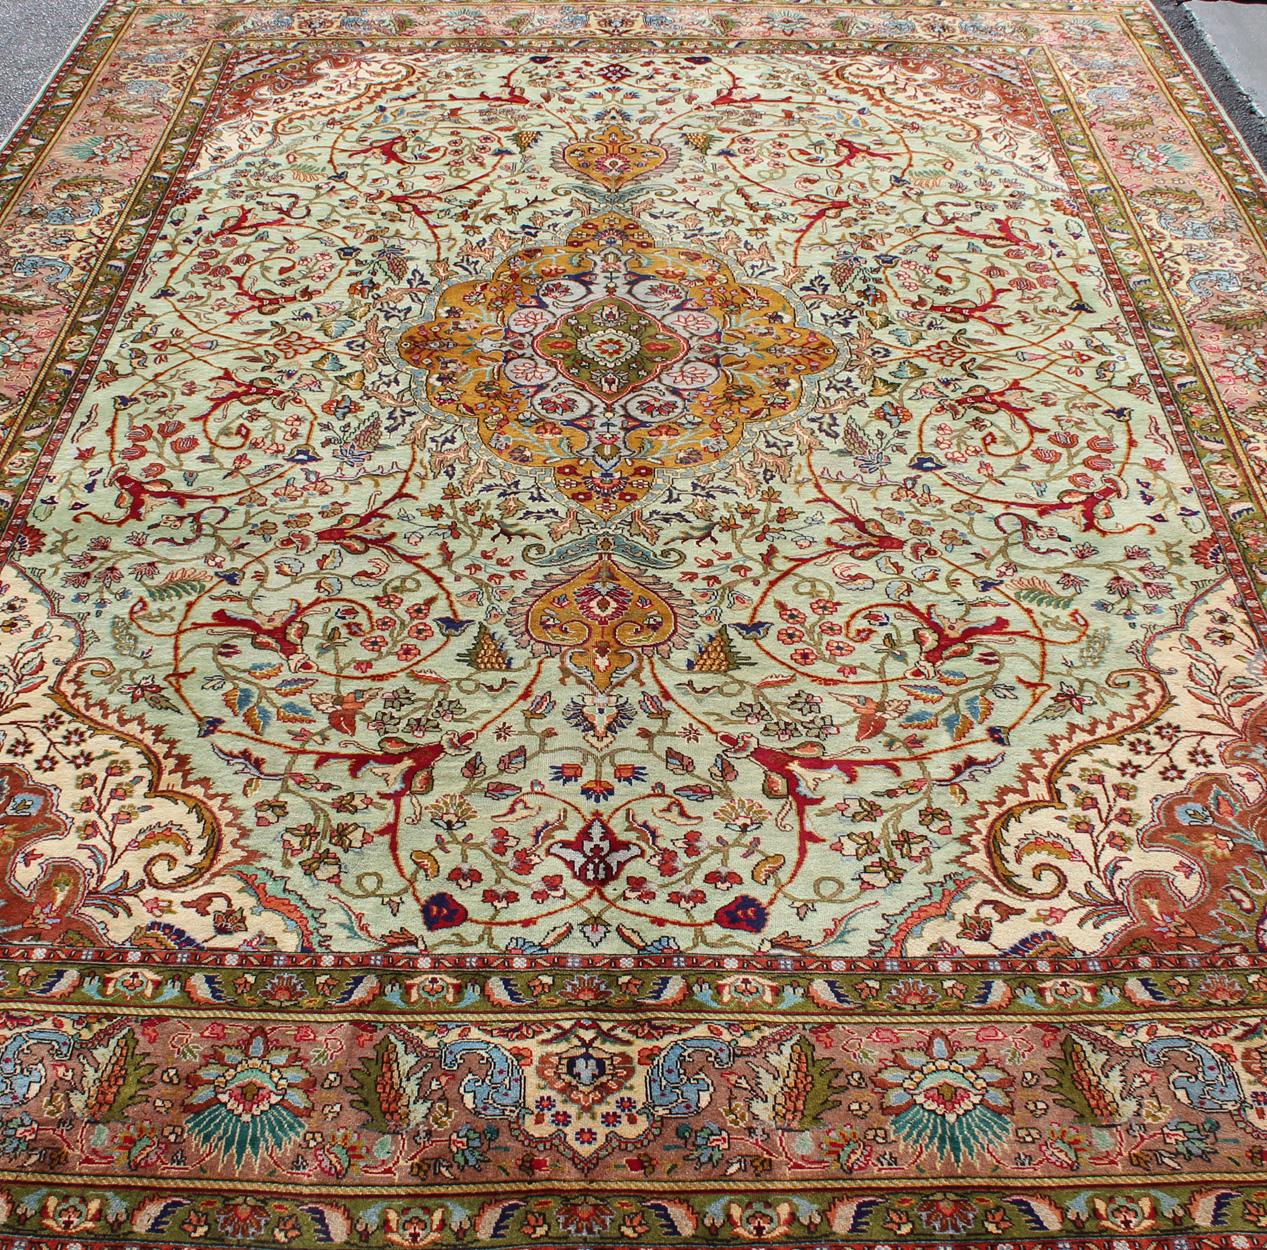 Wool Classic Persian Tabriz Vintage Rug in Celadon Green, Salmon and Multi-Colors For Sale